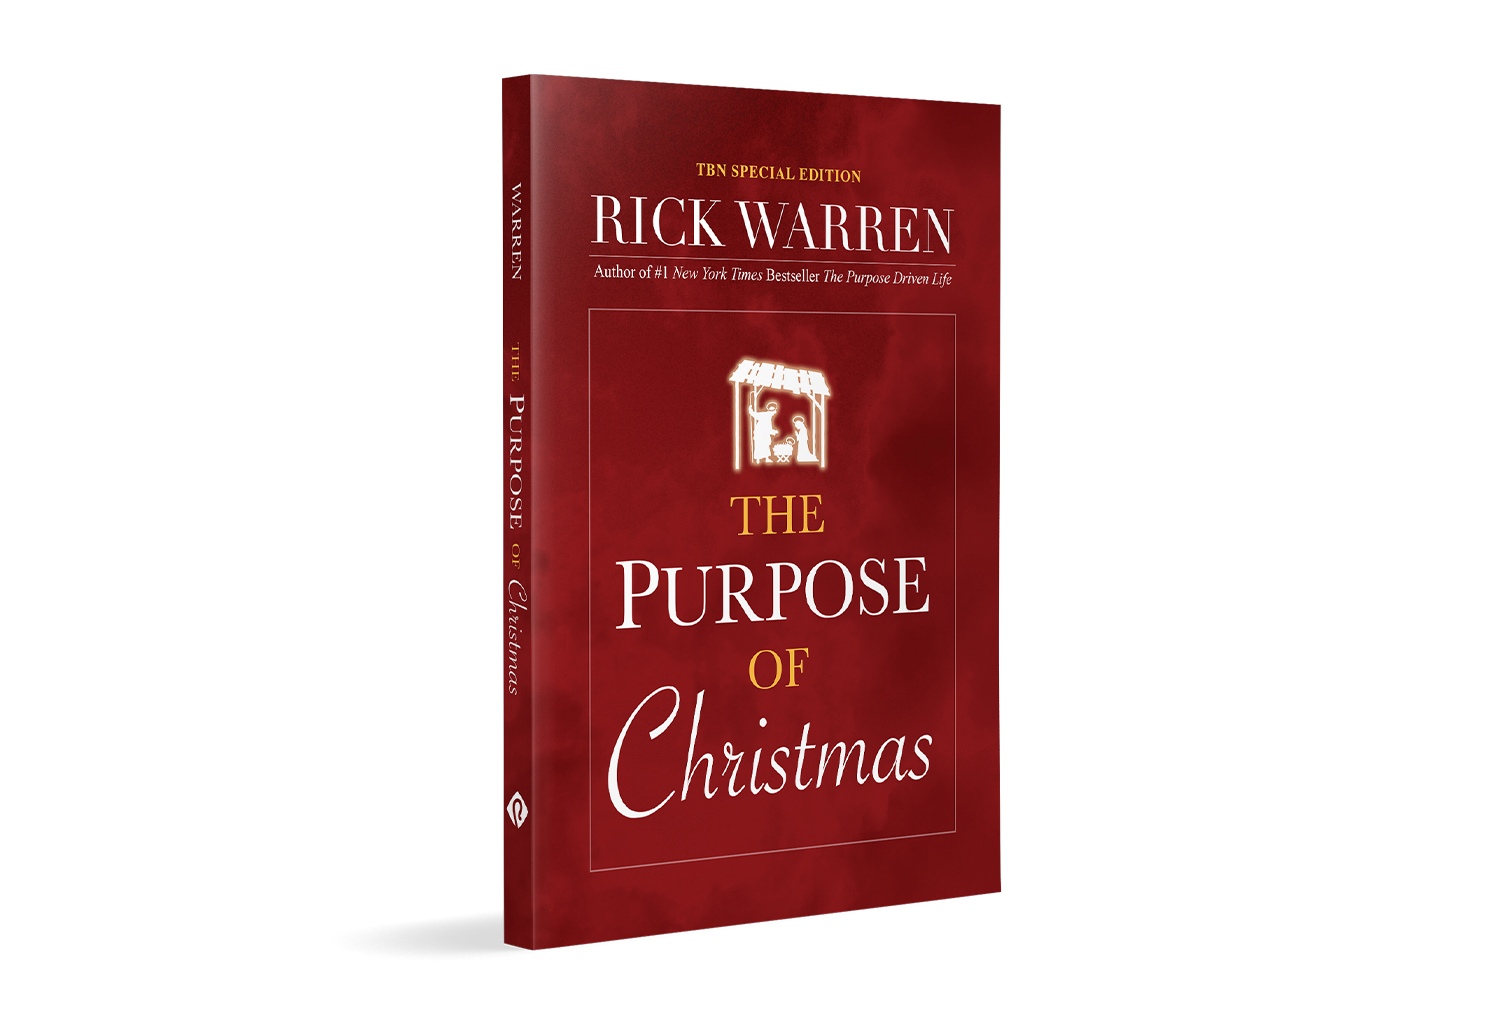 Receive The Purpose of Christmas by Rick Warren from TBN